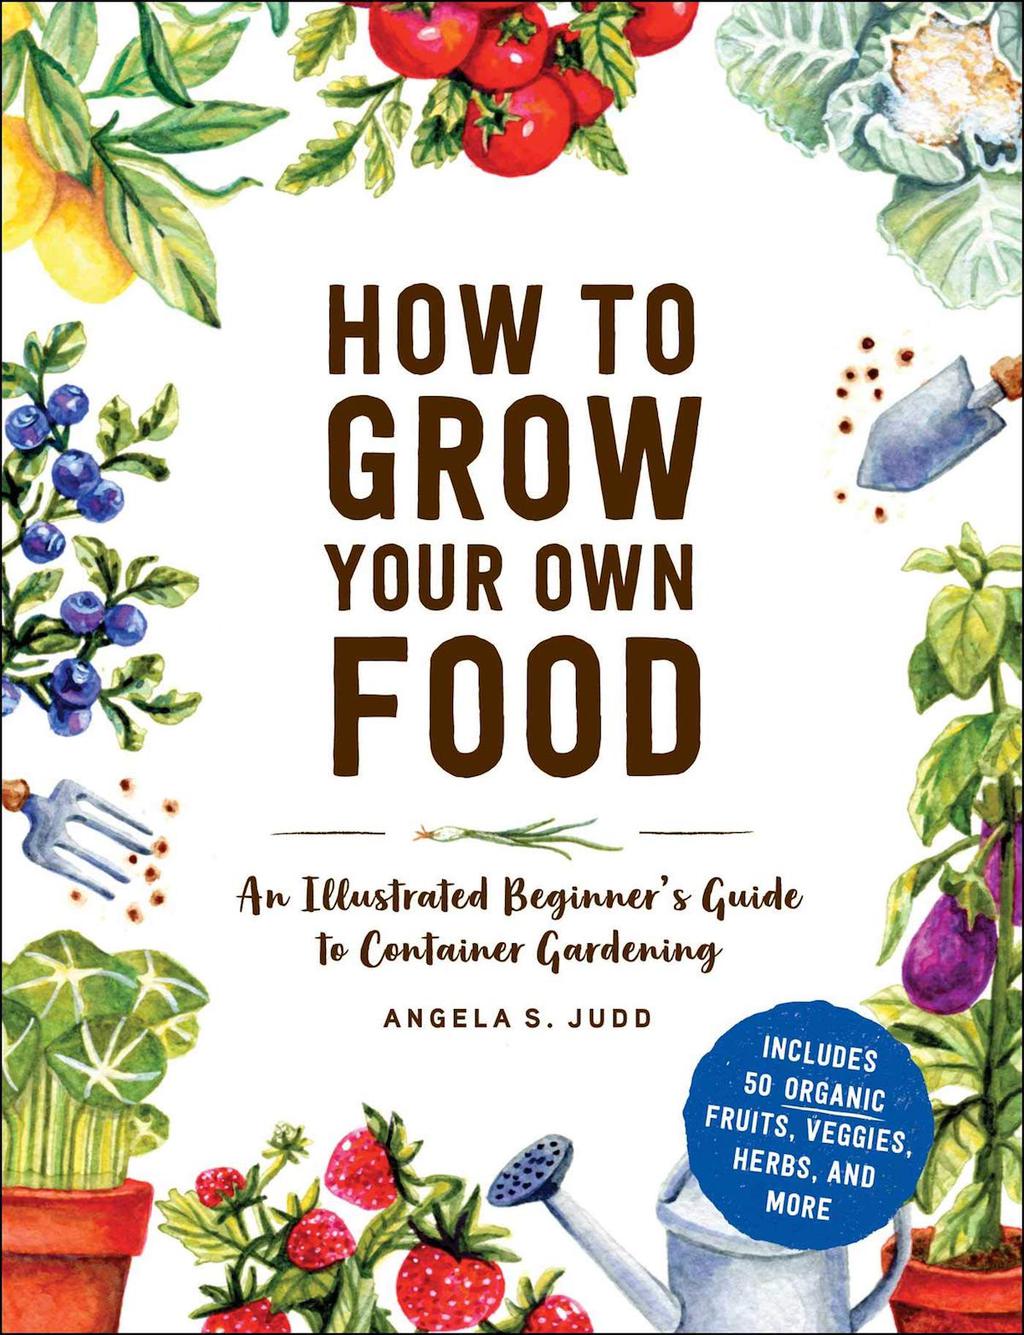 20 Useful Recipe Books To Enhance Your In-Home Dining Experience